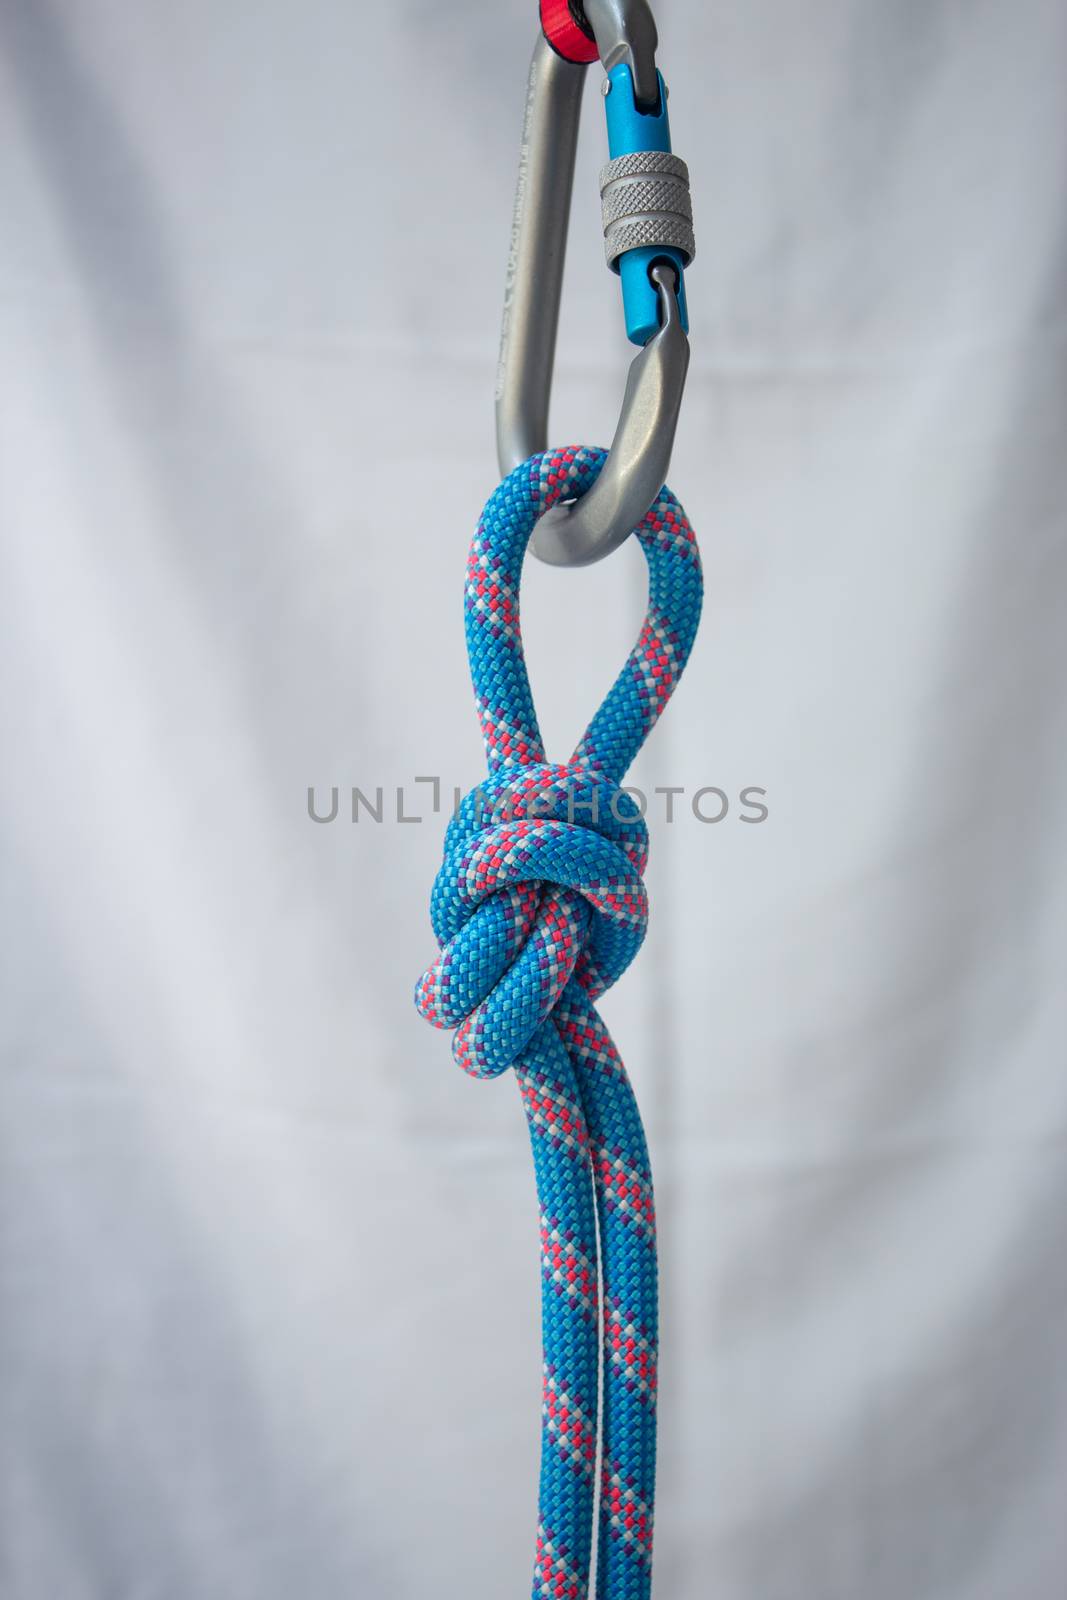 Overhand knot tied with a climbing rope to a pear shaped locking carabiner